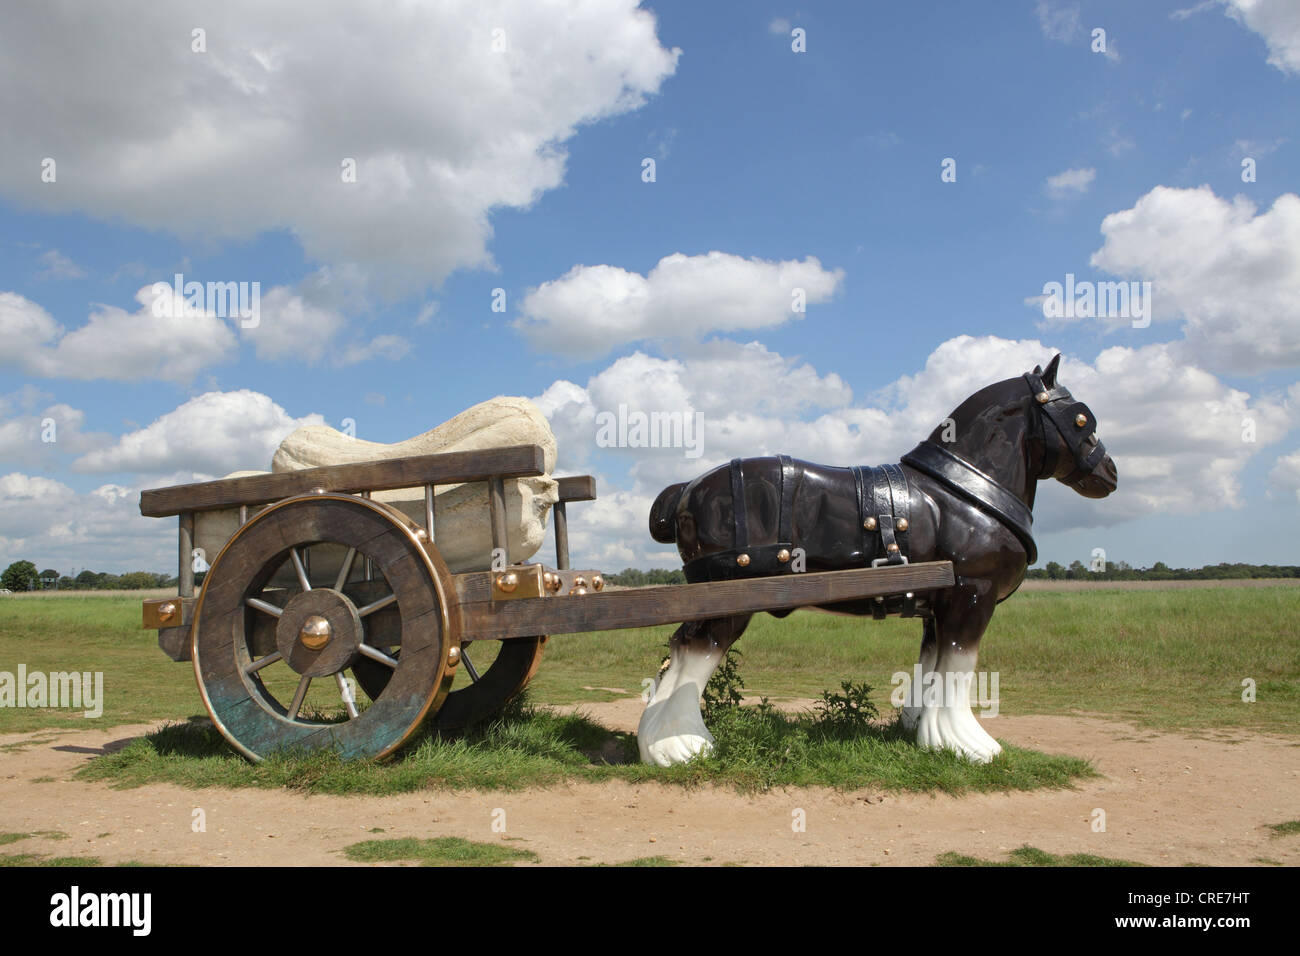 Perceval life sized shire horse by Sarah Lucas, pastiche, kitsch parody of low brow 'mantle piece' ceramics, Snape, Suffolk, UK Stock Photo